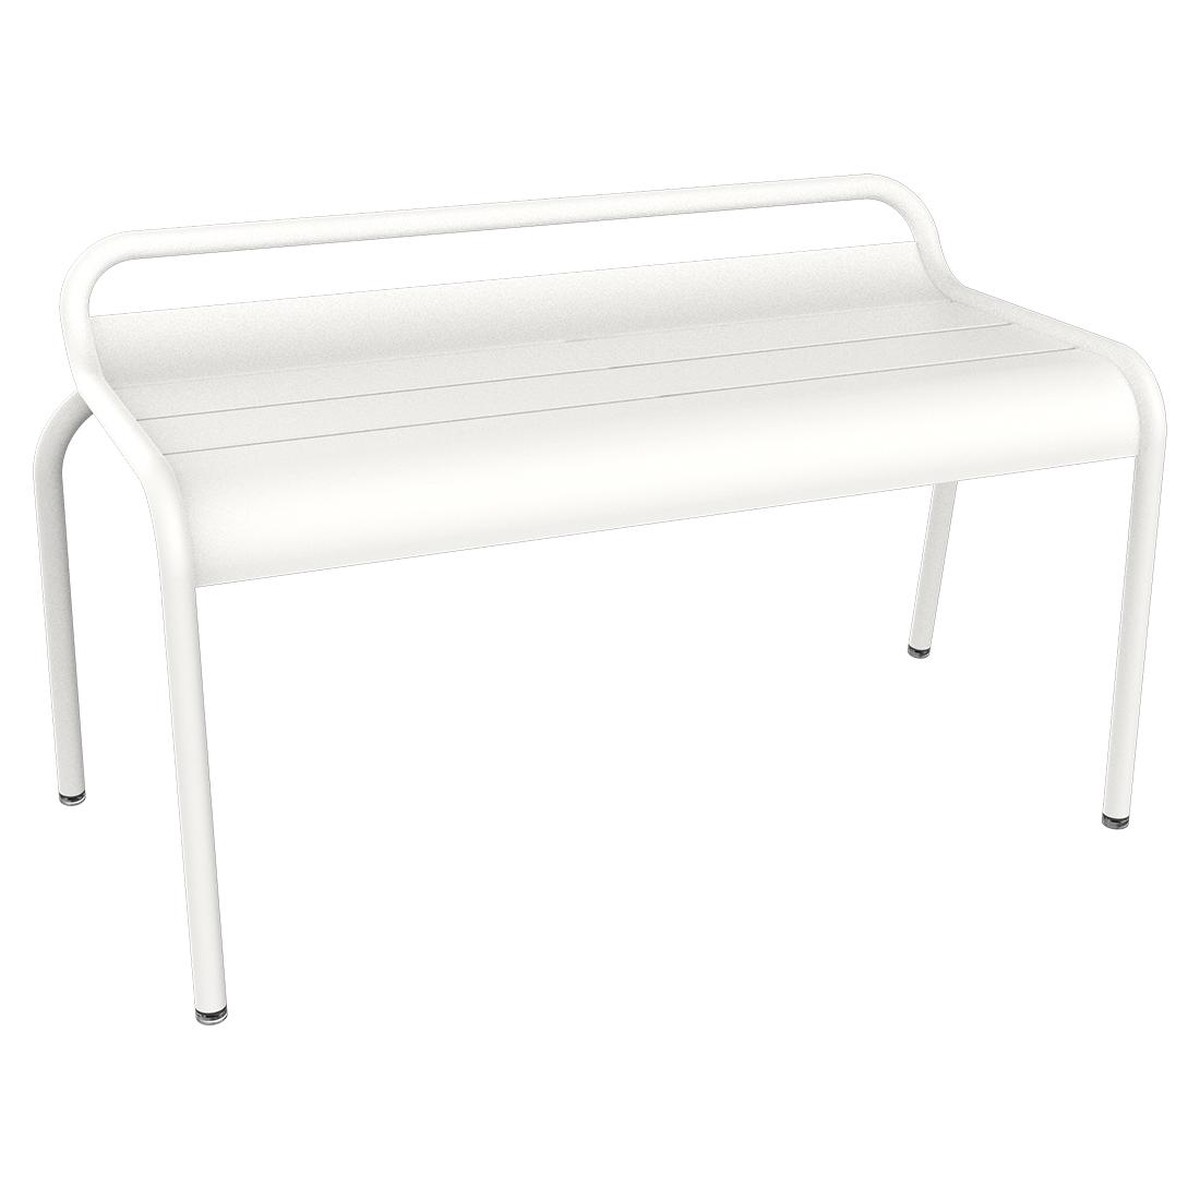 Fermob Luxembourg Banc Compact Luxembourg Blanc L 118 x l 56 x H86cm